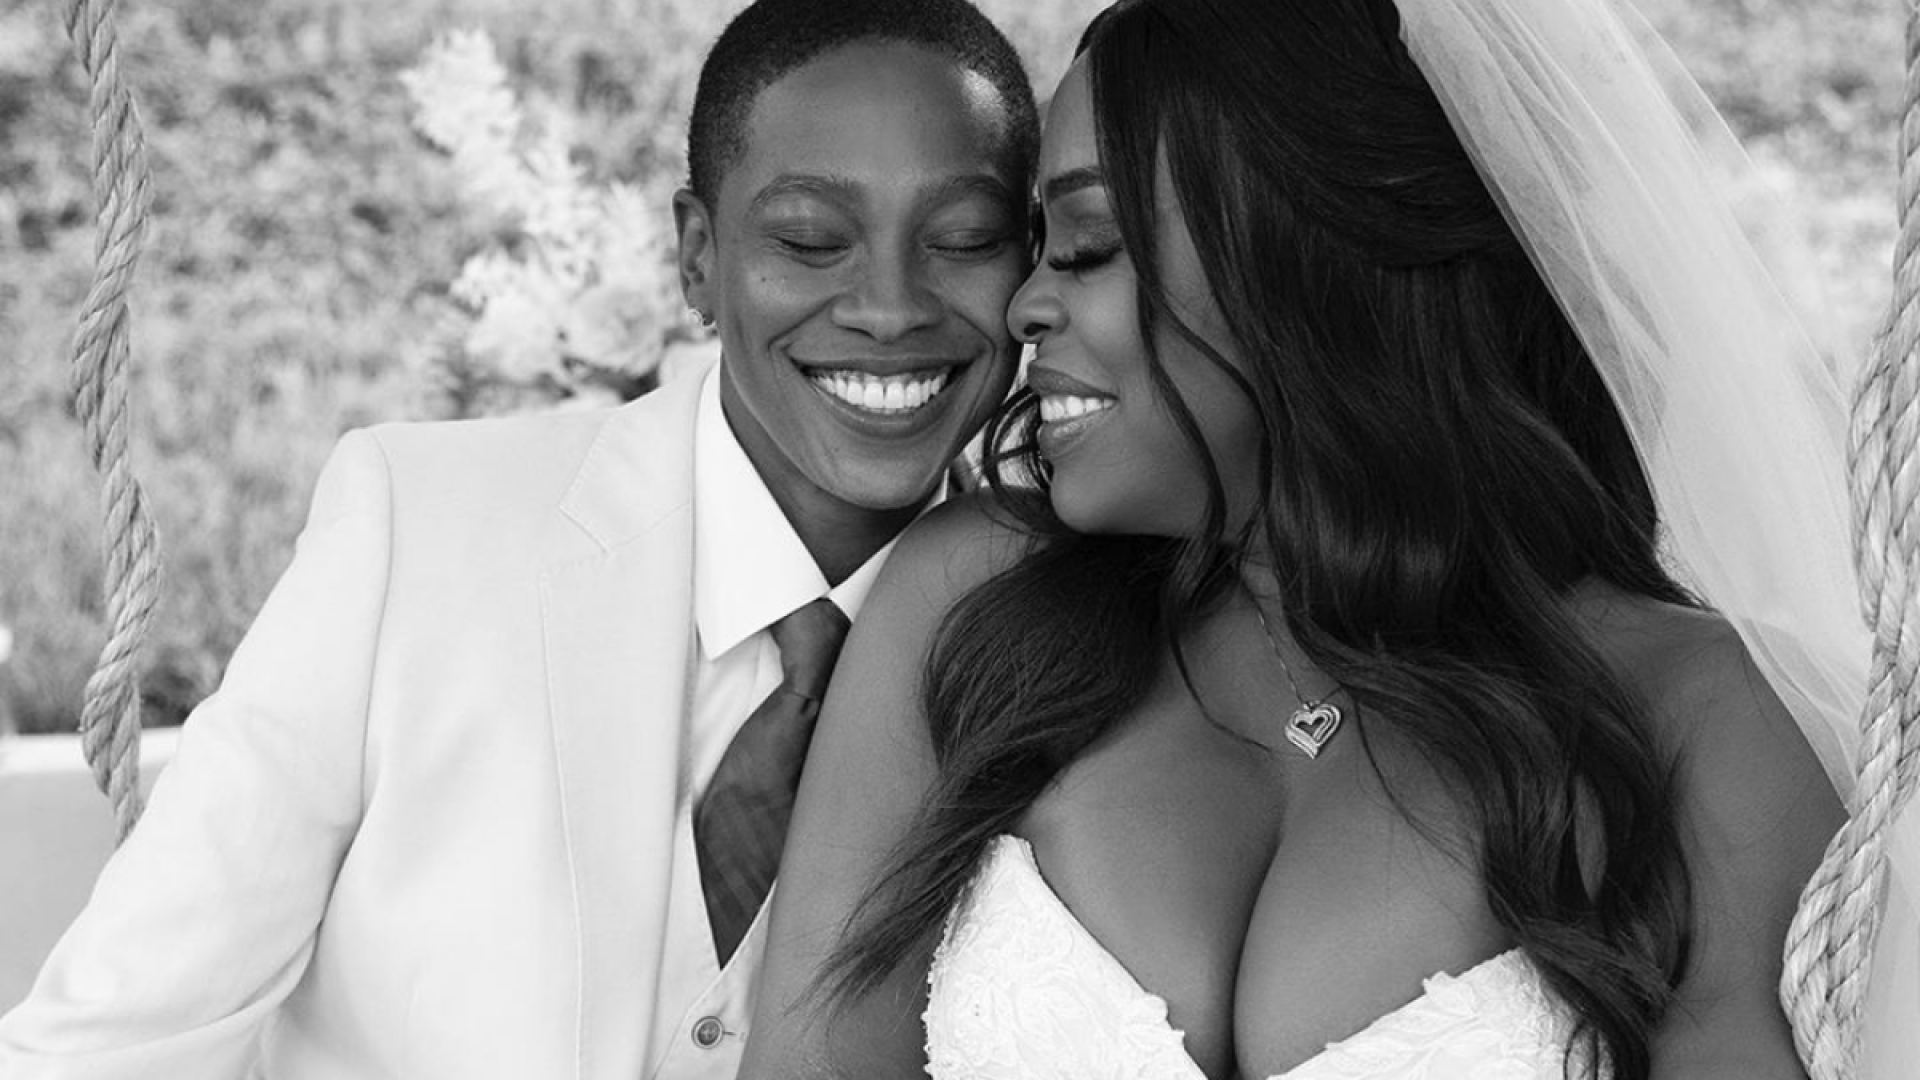 Niecy Nash Gushes About Her New Wife Jessica Betts: 'I Love Who I Love'